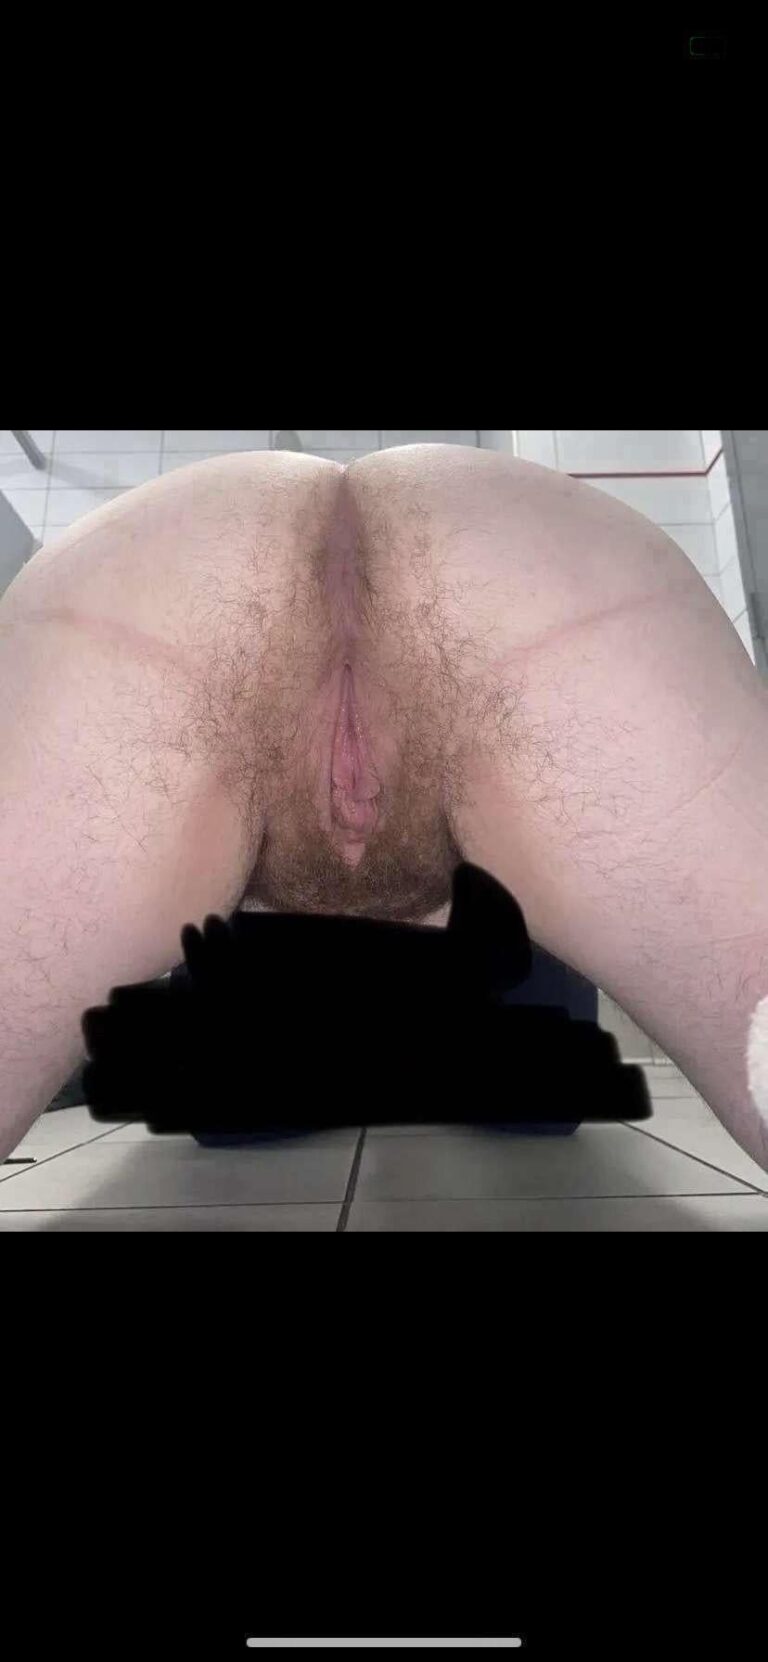 (trans male ftm) my pink virgin boy pussy is waiting to be deflowerd daddy 🙏😍